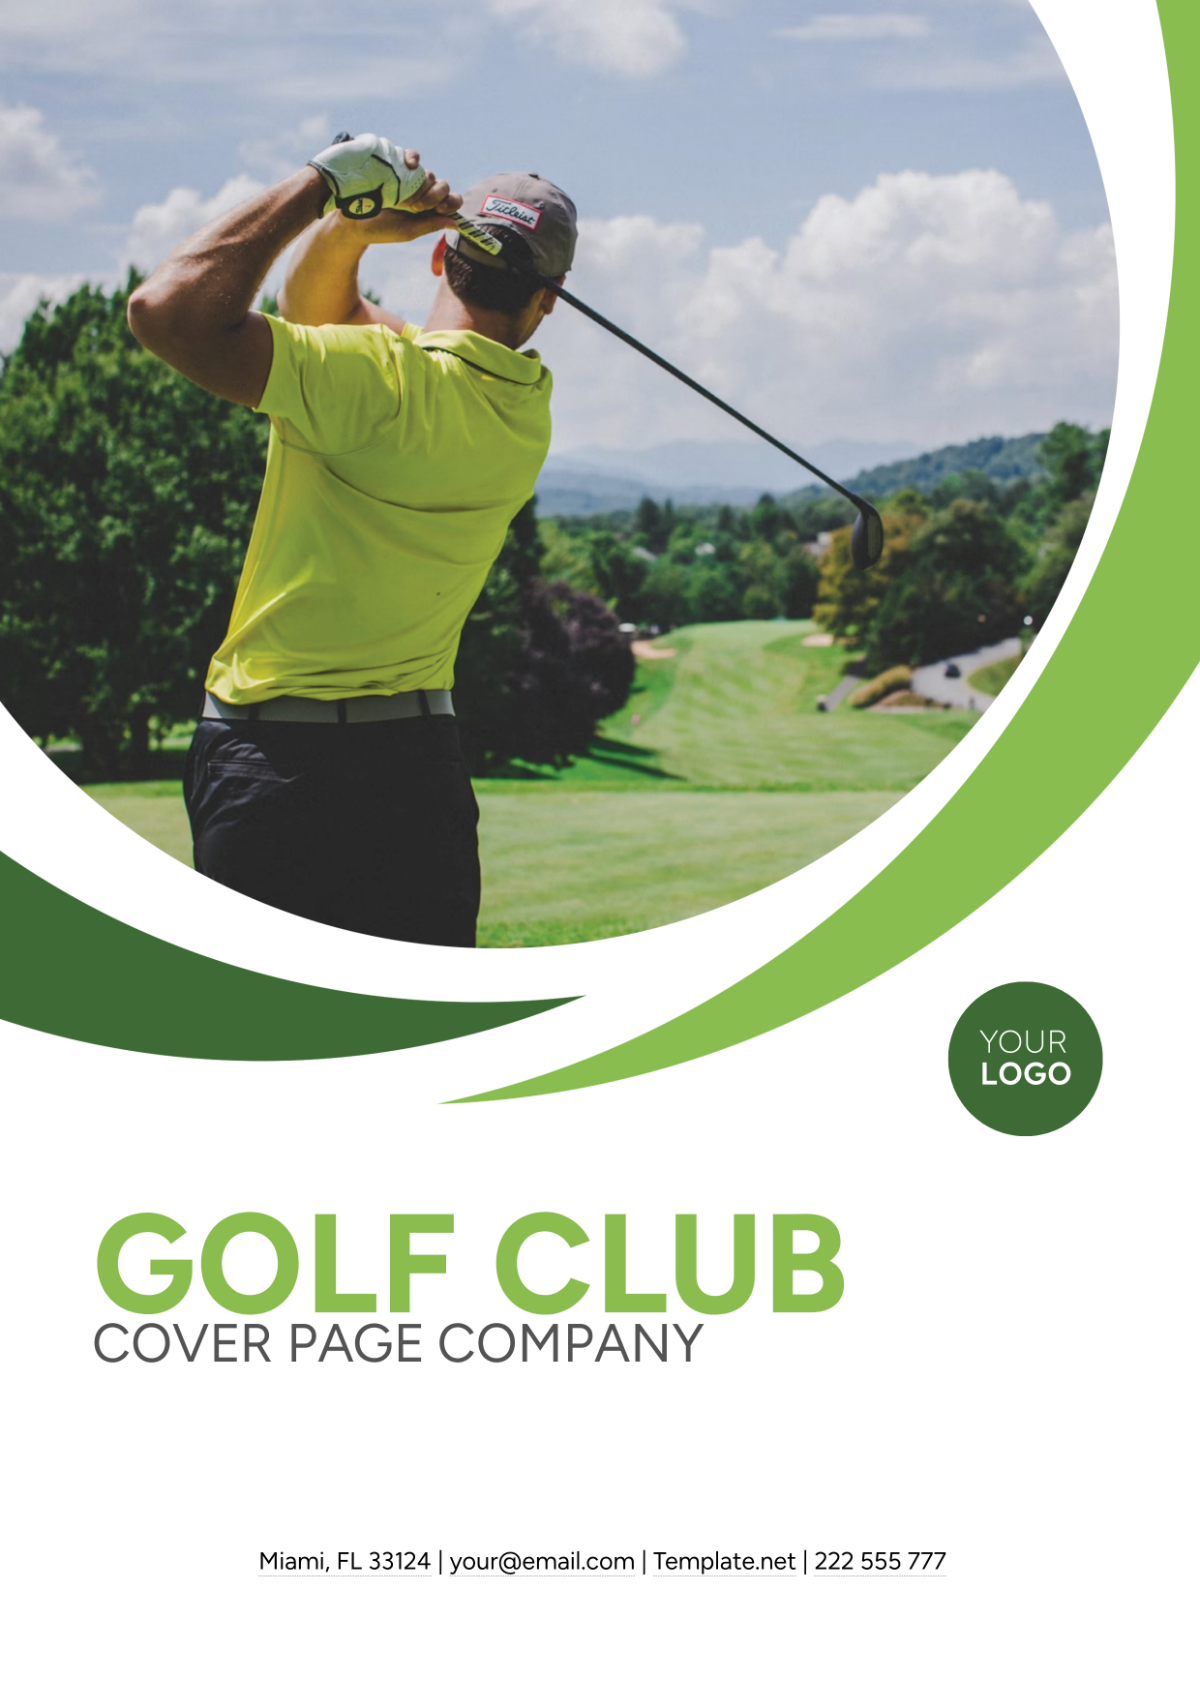 Golf Club Cover Page Company Template